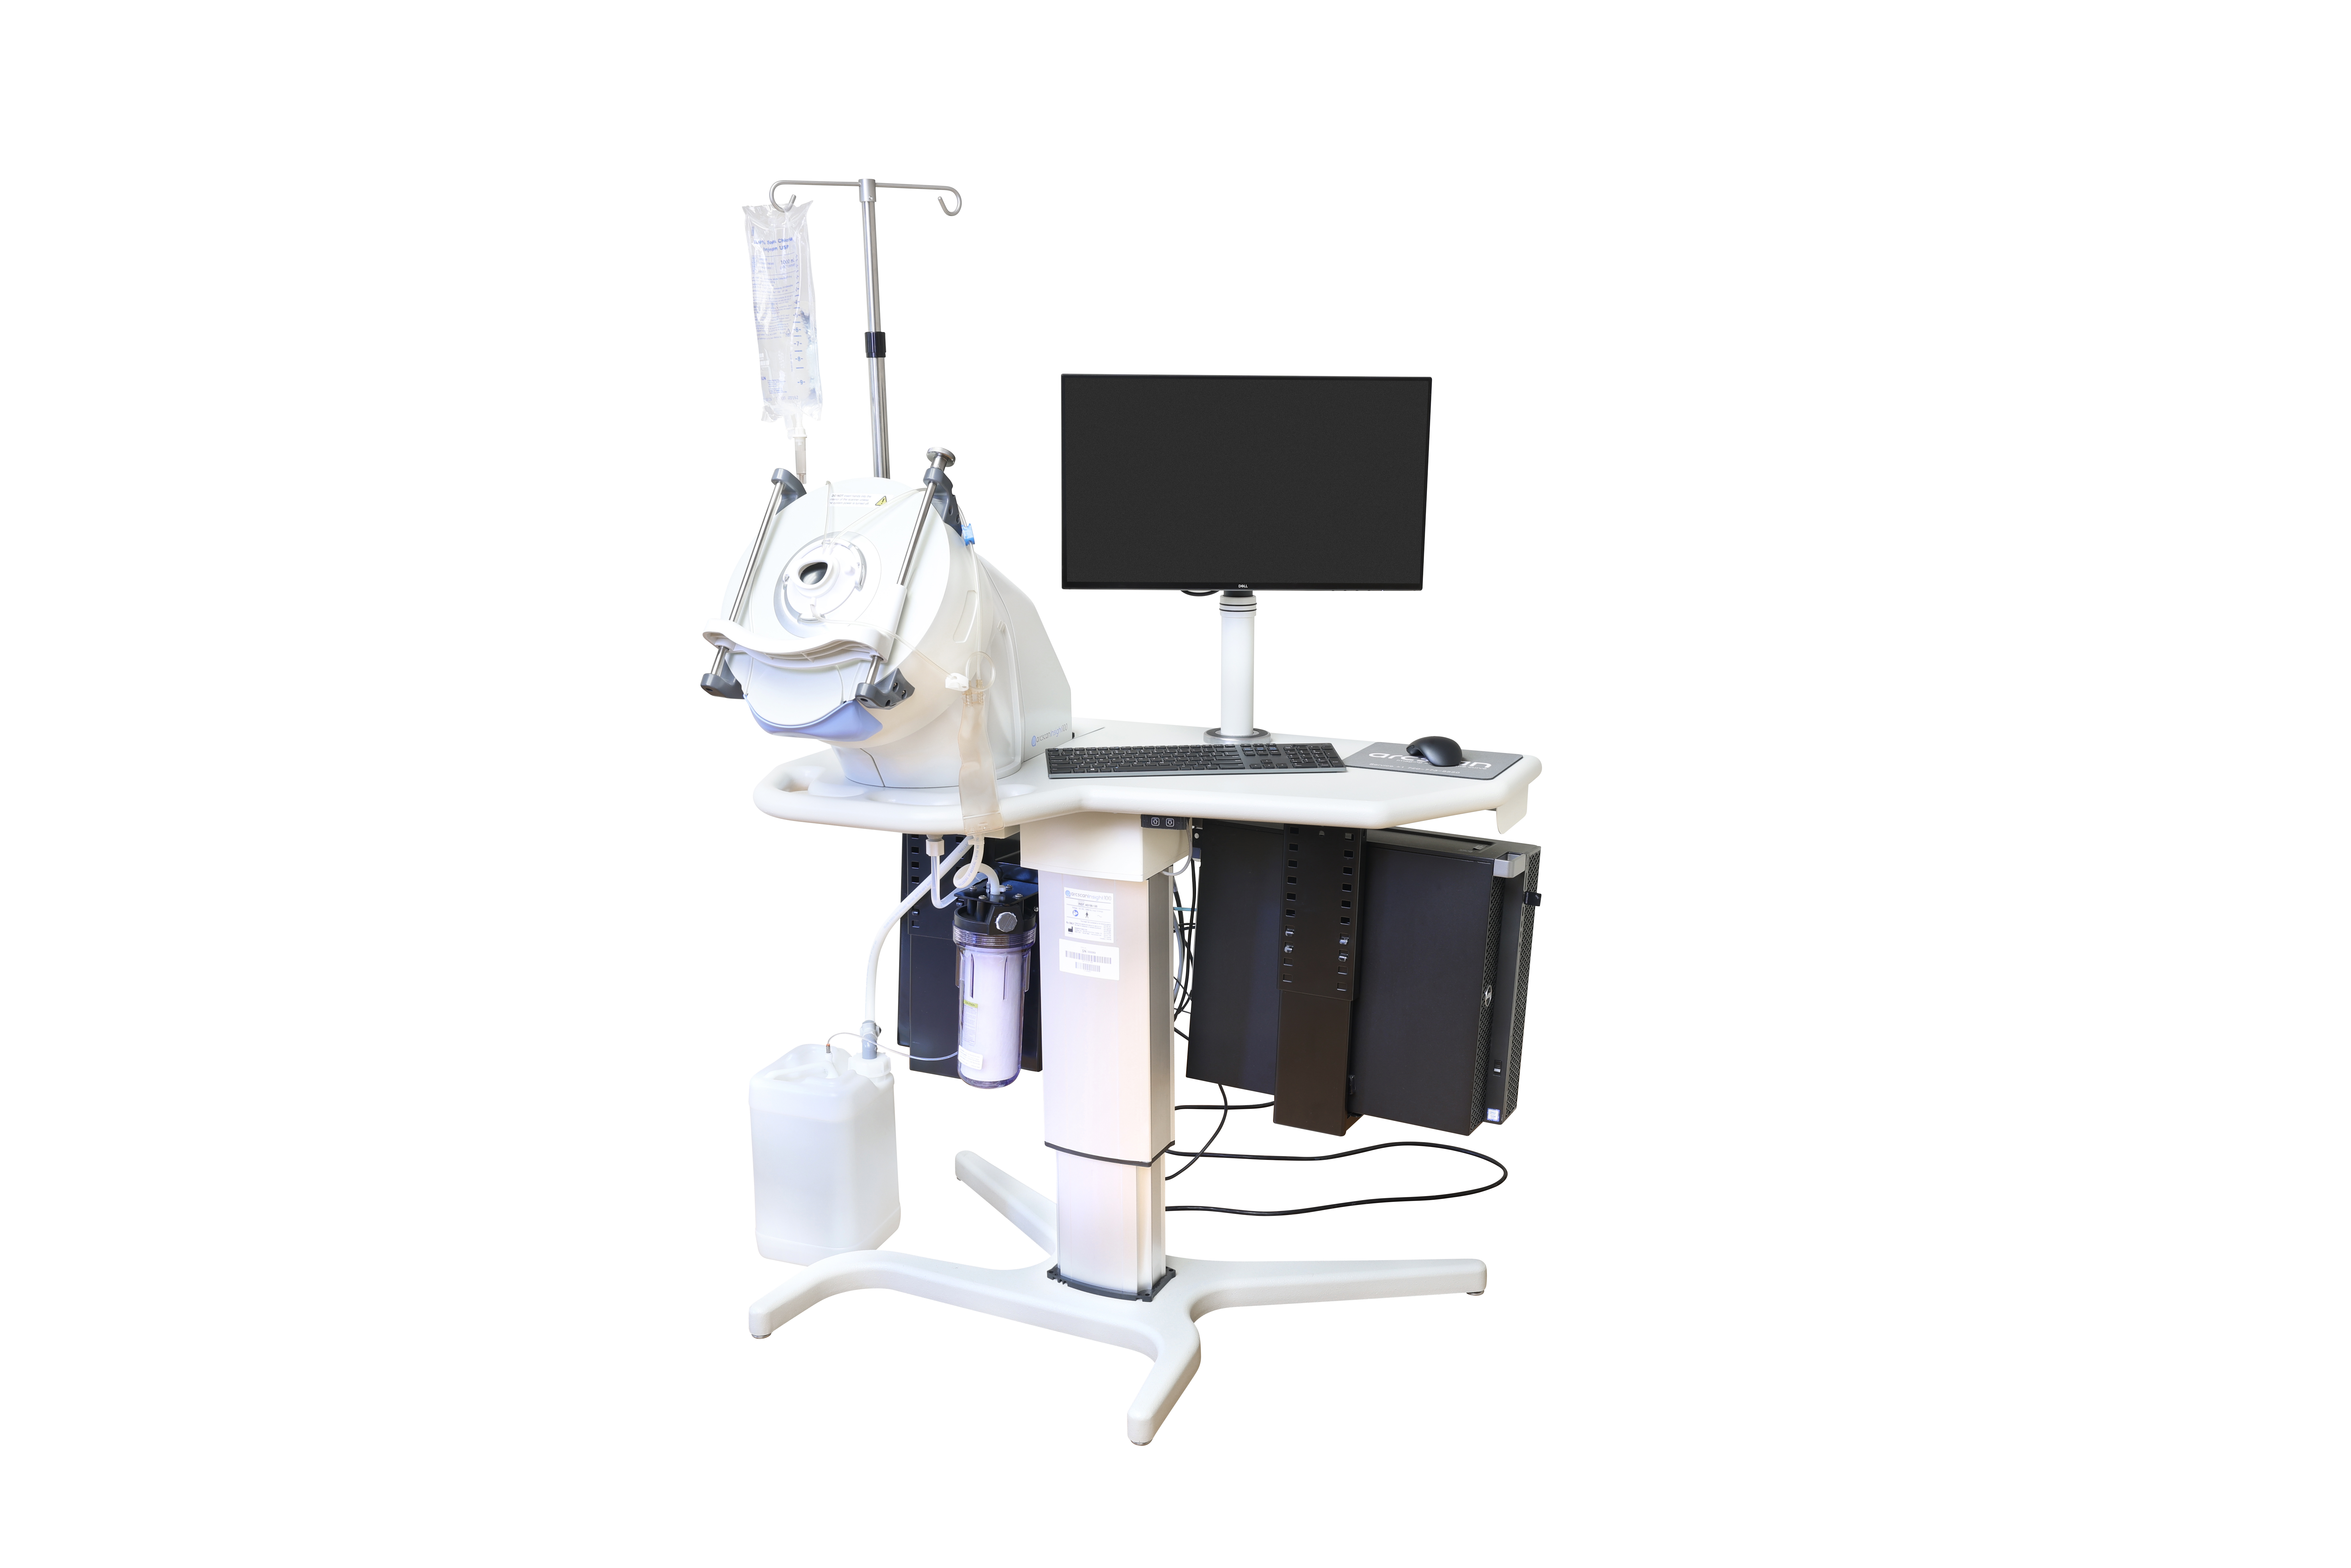 ArcScan, Inc.’s Insight® 100 is a computer-controlled high-frequency ultrasound device designed to equip ophthalmologists with precise, detailed images of the anterior segment of the eye.